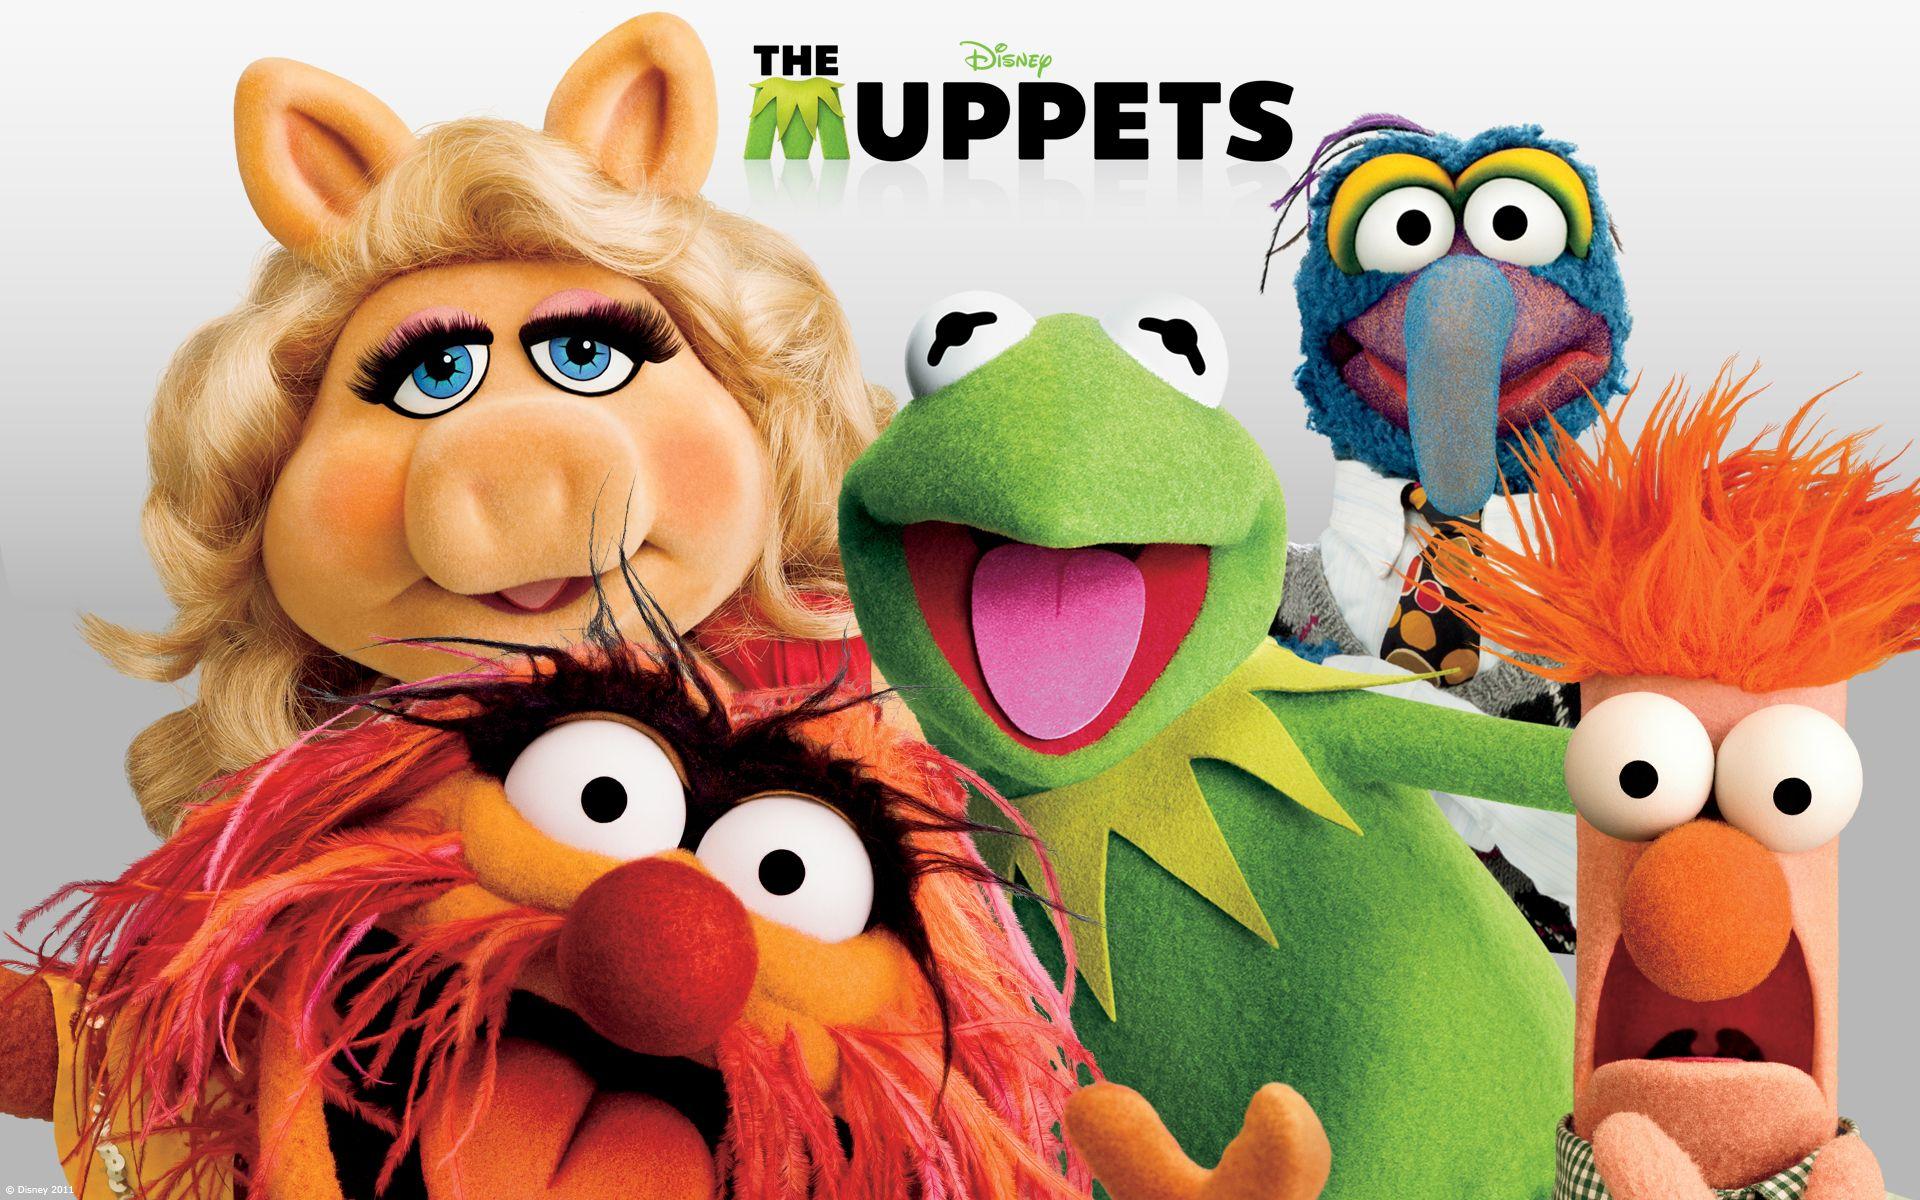 The Muppets #Image